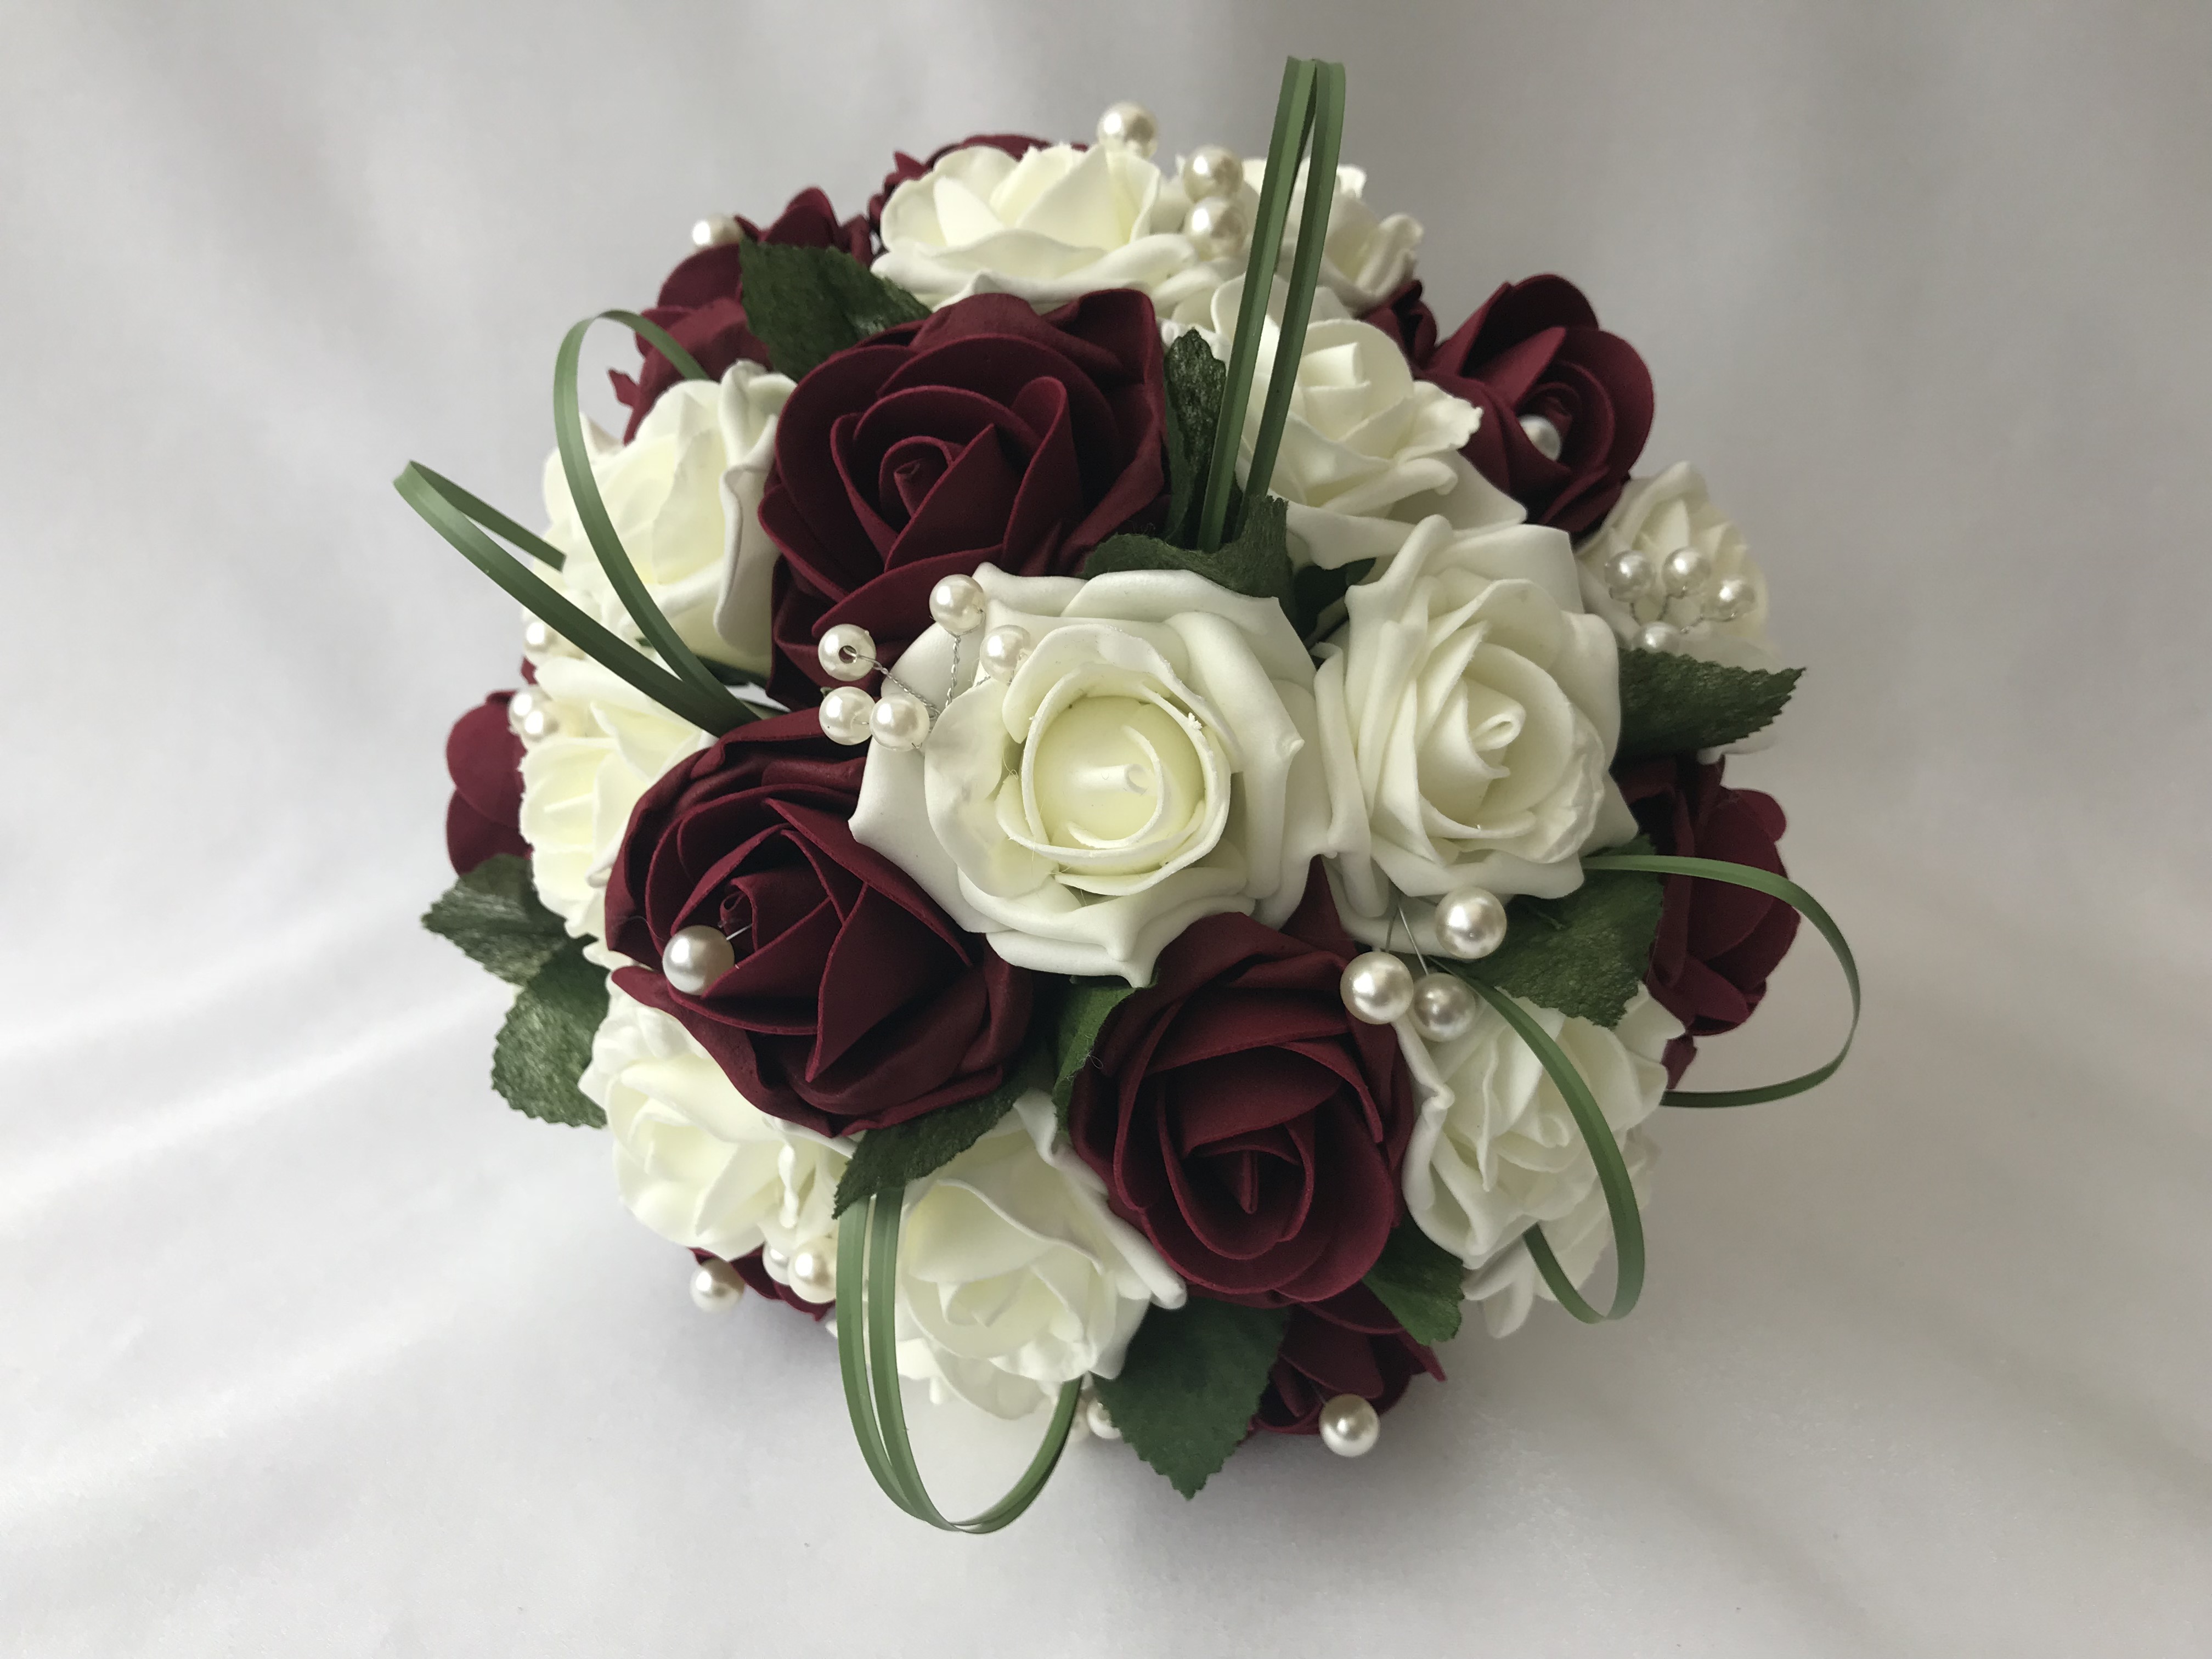 WHITE & GREY ROSES BRIDES POSY BOUQUET ARTIFICIAL WEDDING FLOWERS RED